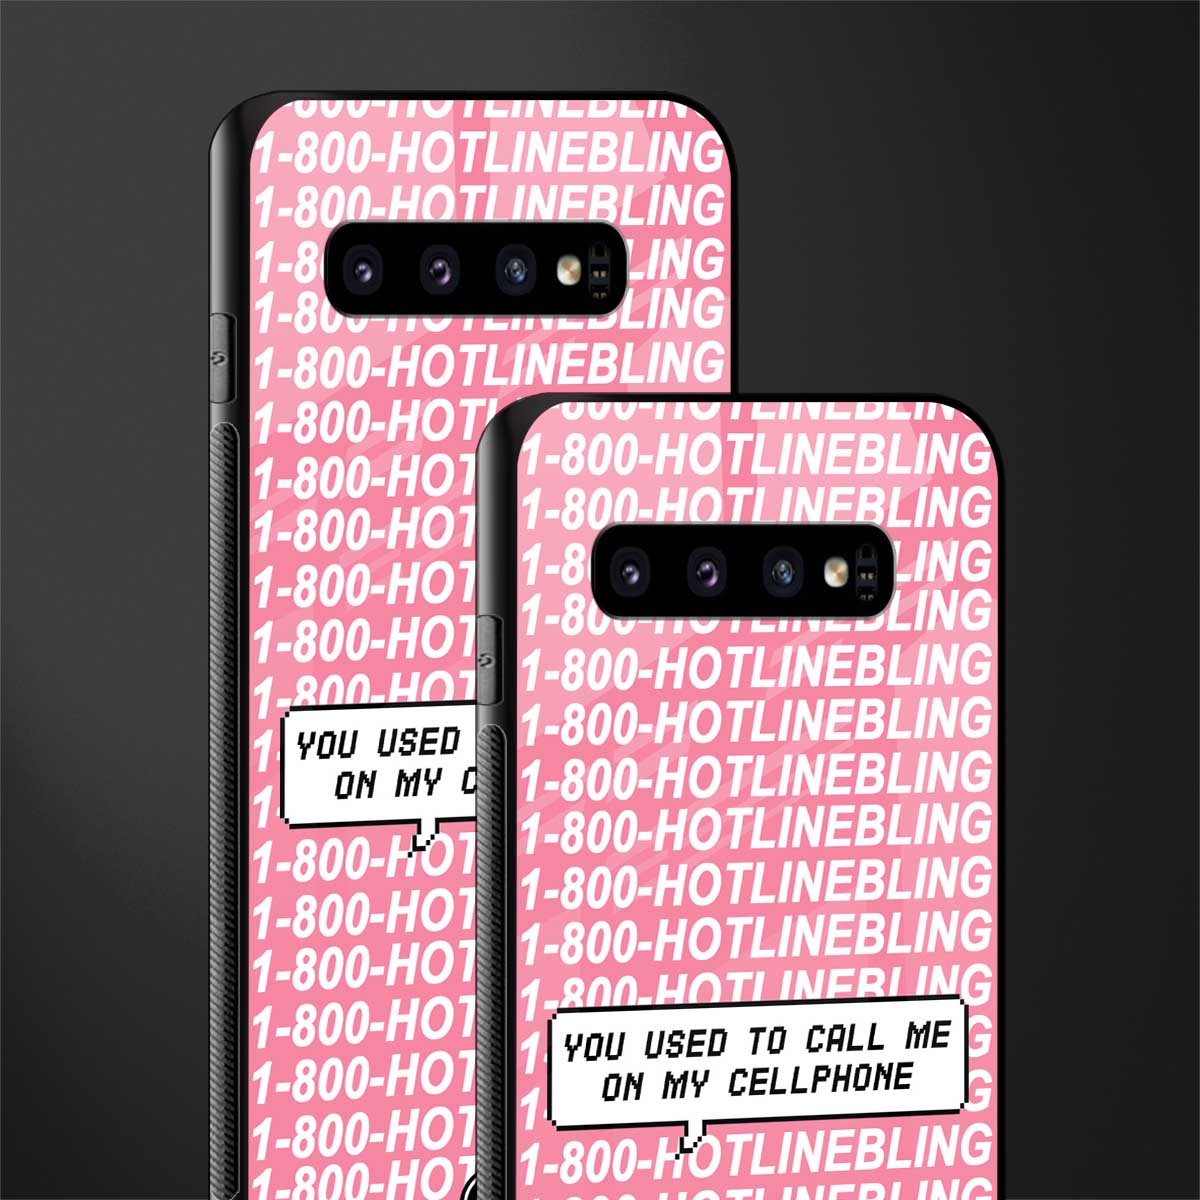 1800 hotline bling phone cover for samsung galaxy s10 plus 